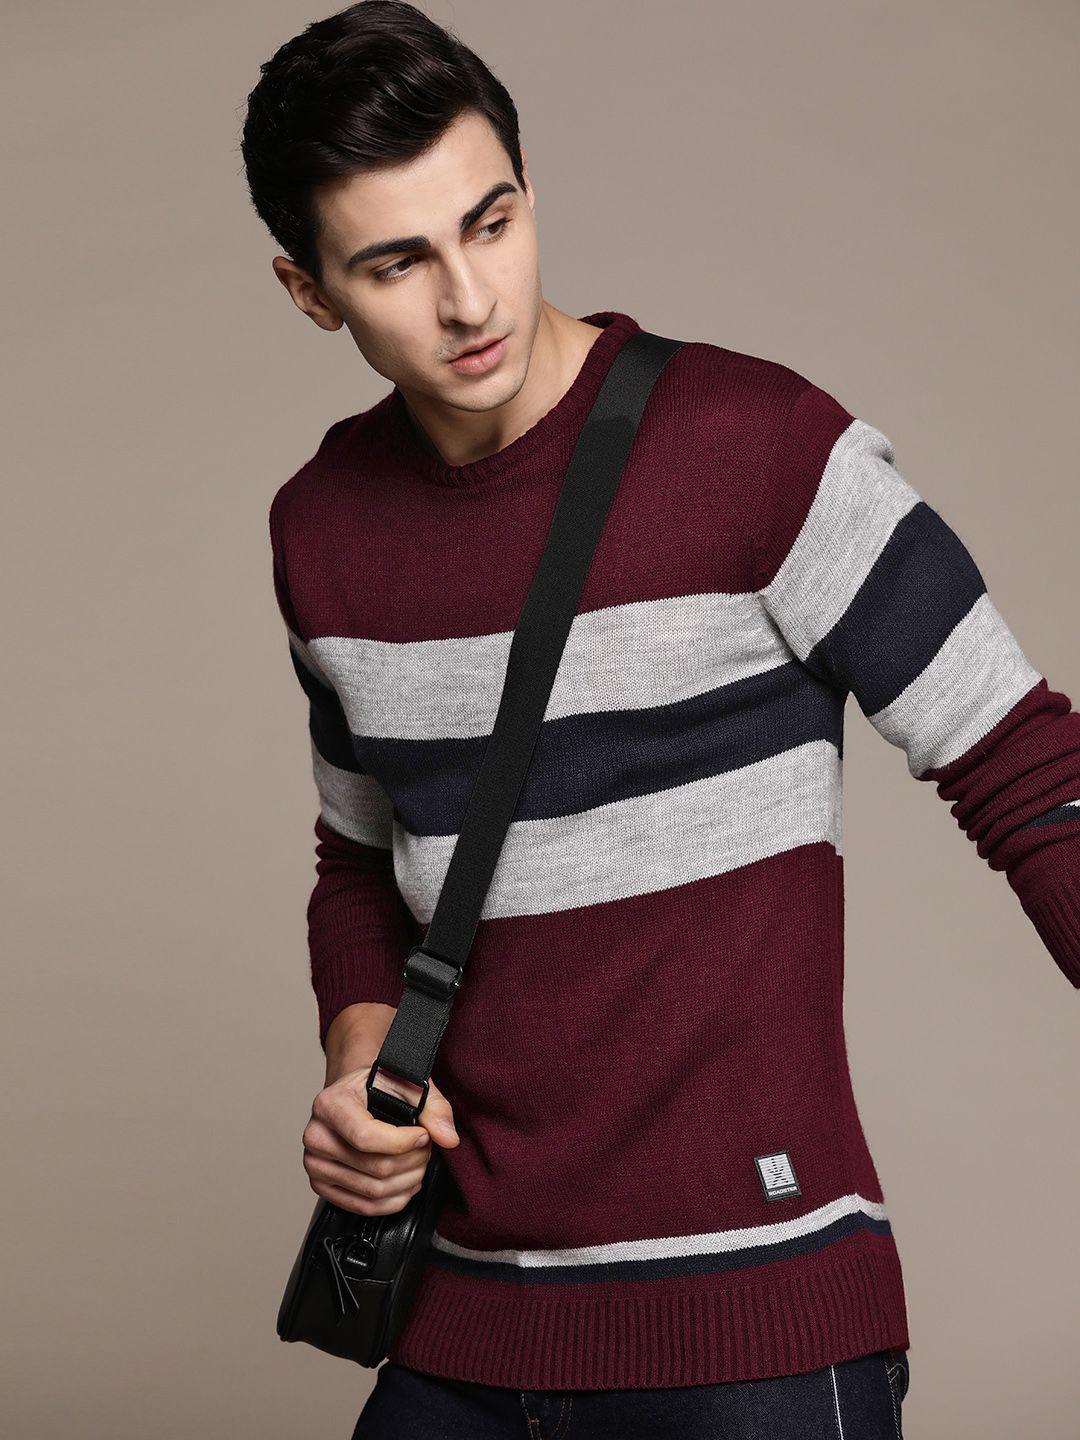 the-roadster-lifestyle-co.-striped-acrylic-pullover